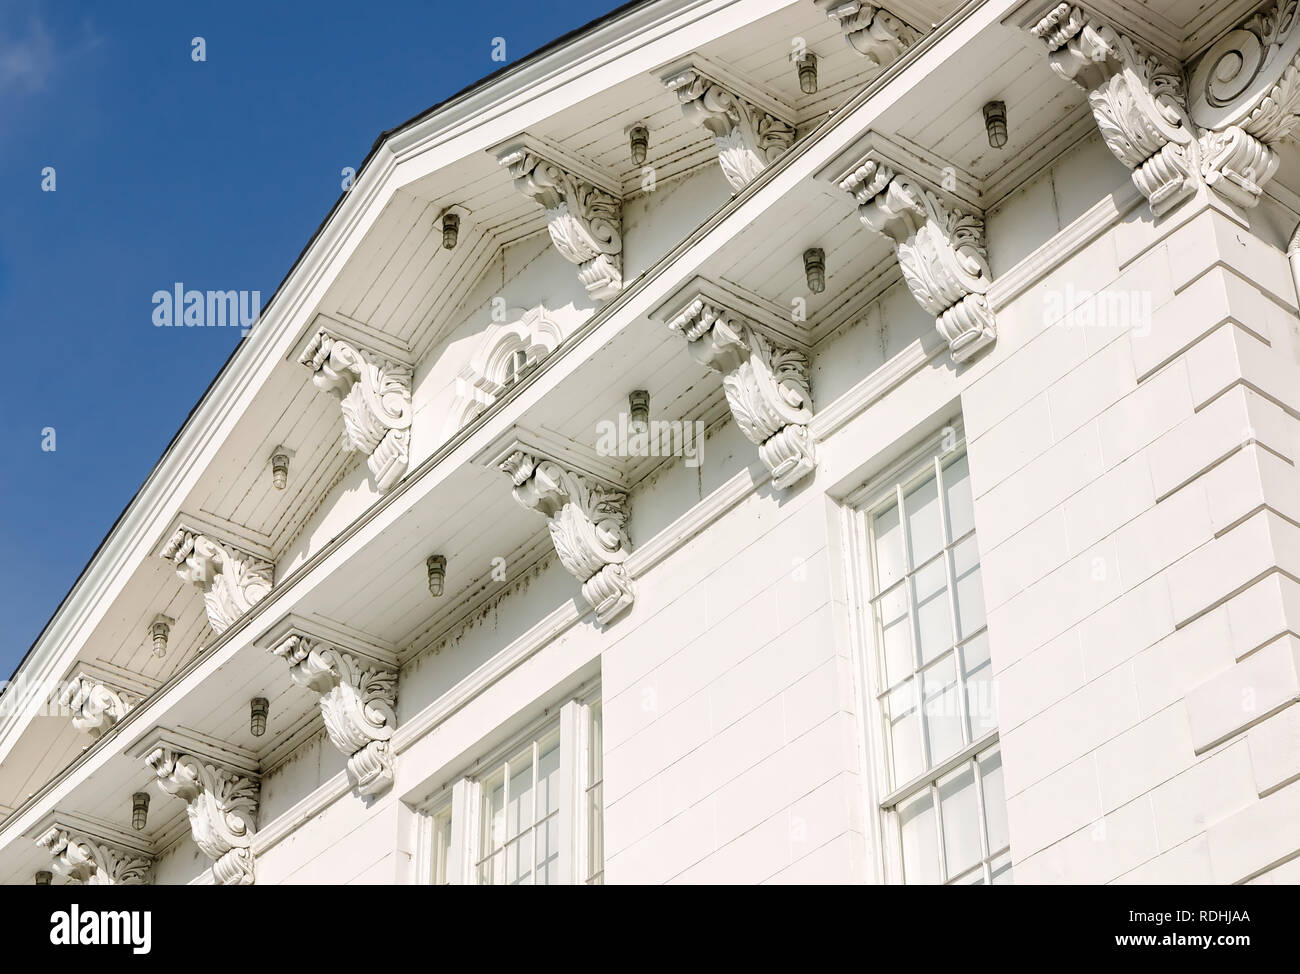 The roof detail of the History Museum of Mobile is shown, Dec. 23, 2018, in Mobile, Alabama. Stock Photo